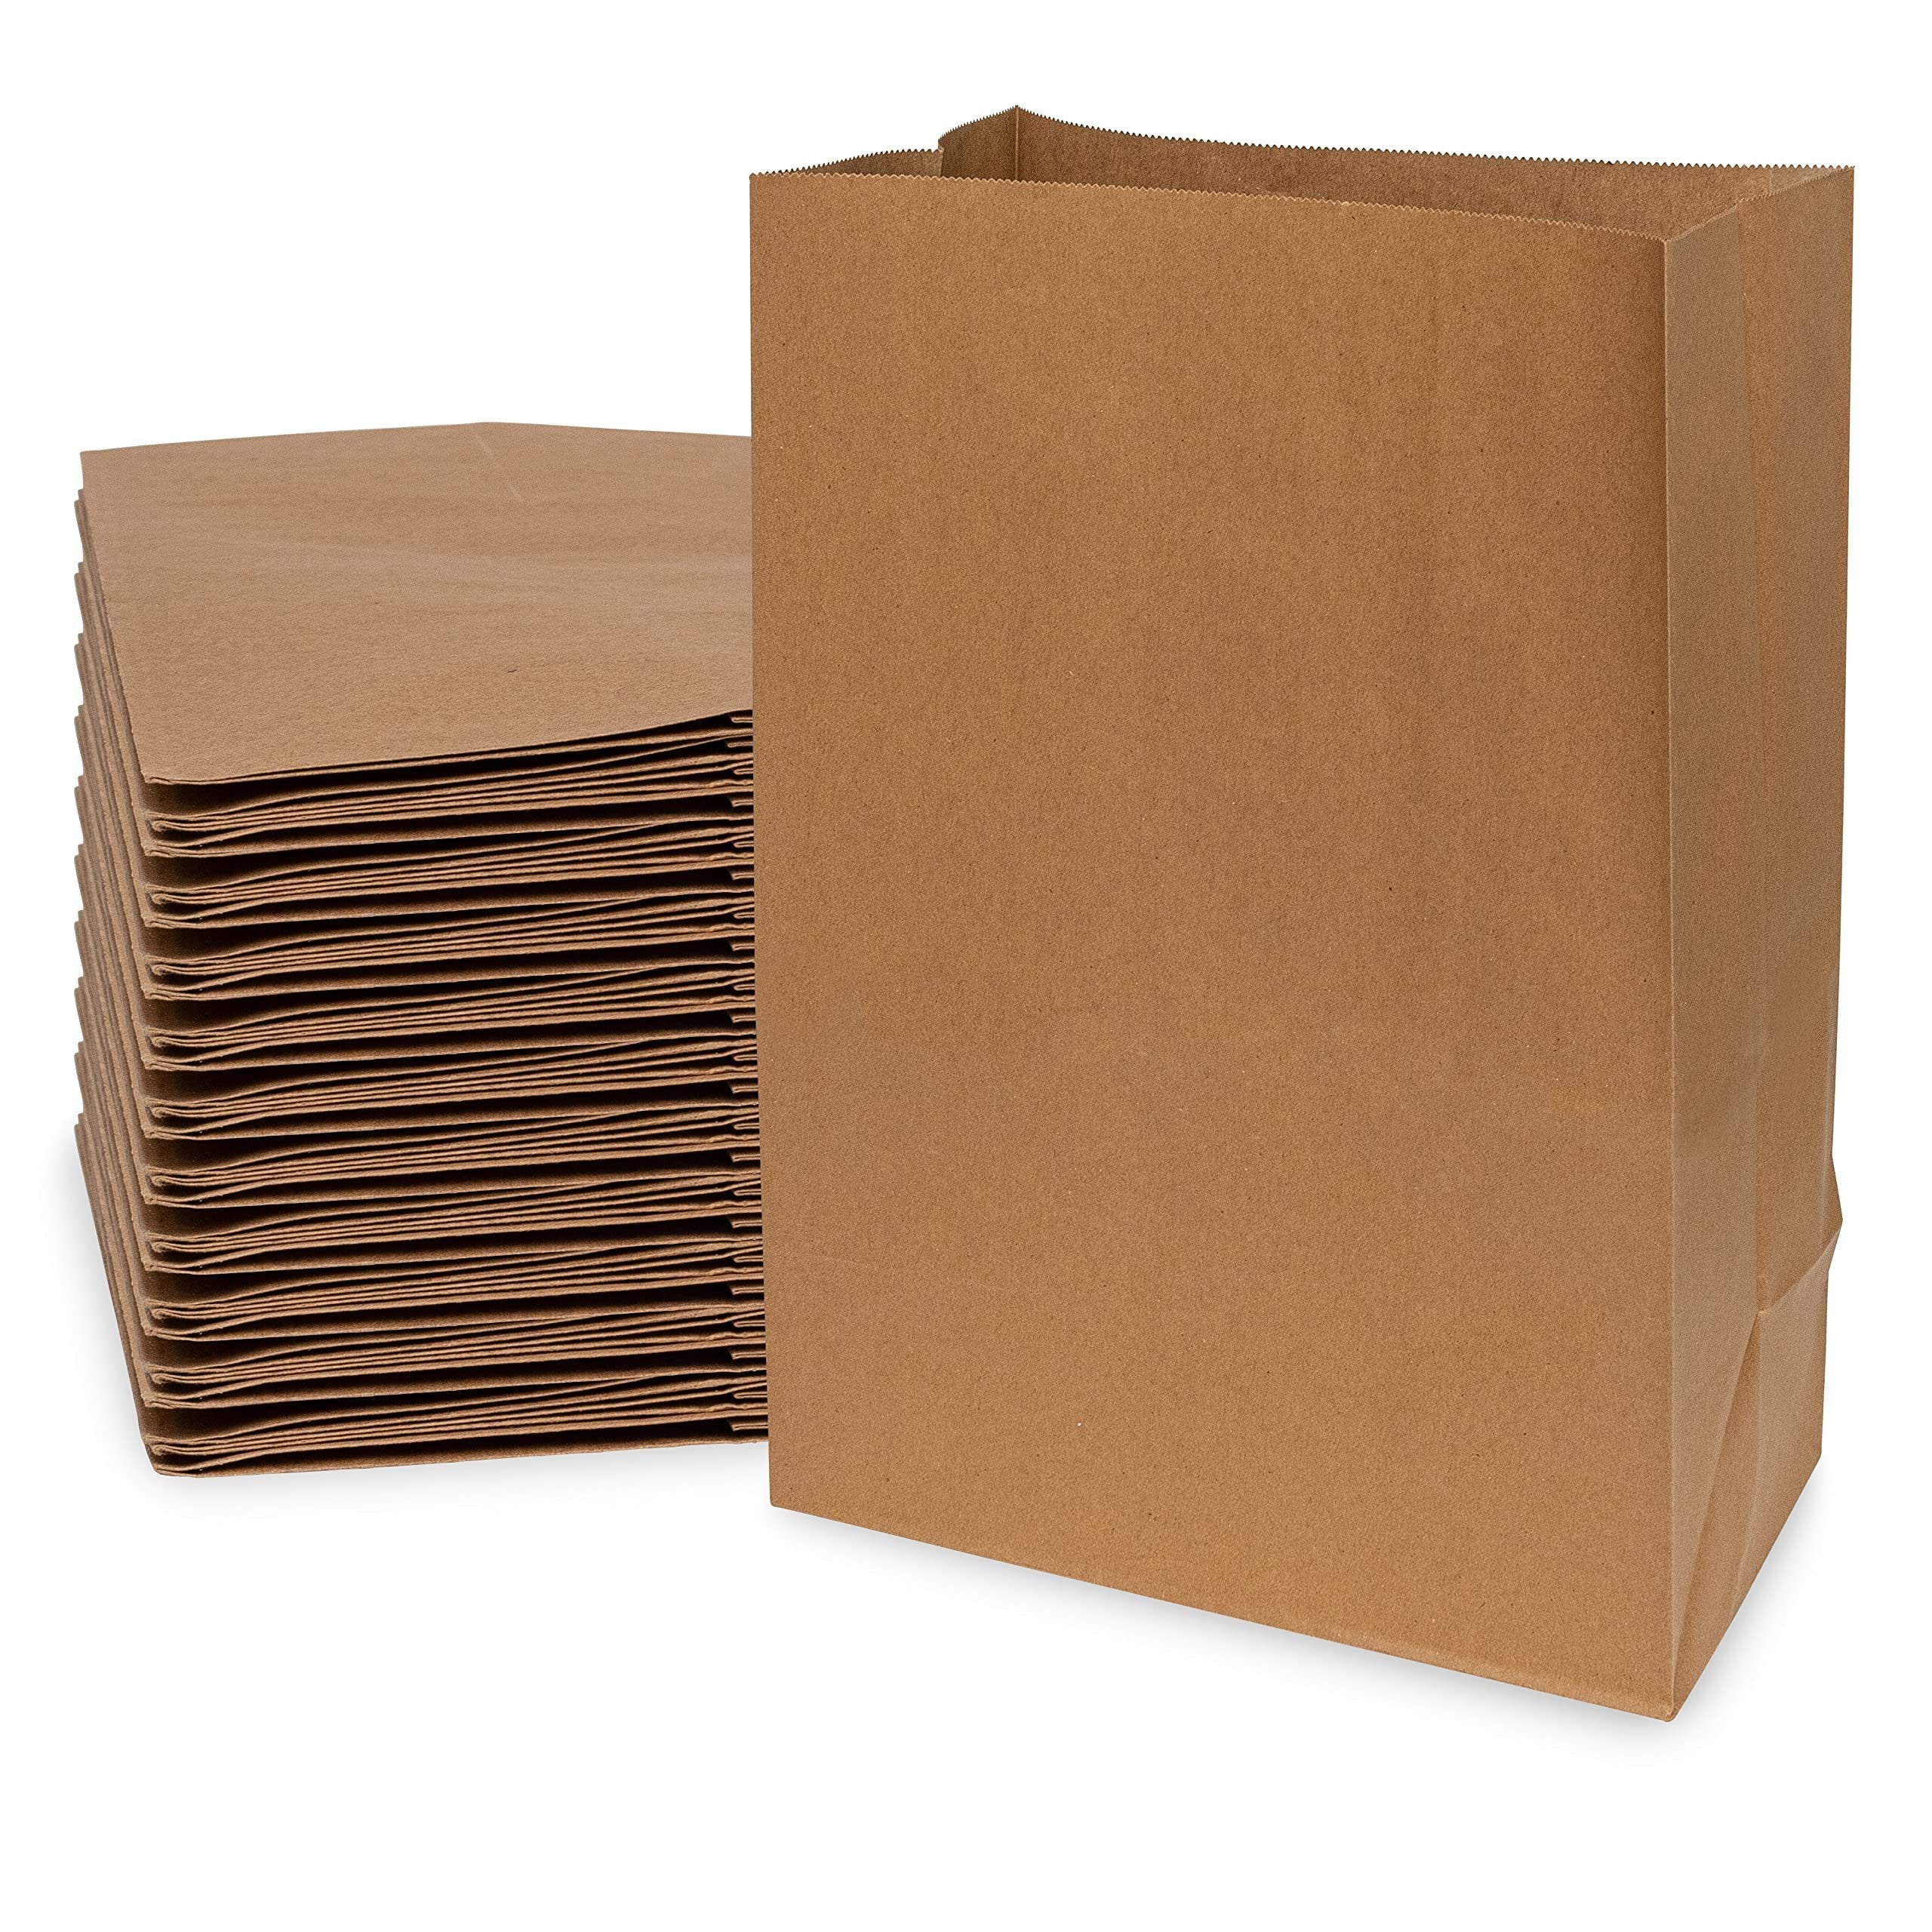 Brown Paper Bags - Extra Large Kraft Paper Shopping Bags, SOS Grocery Bags in Bulk for Lunch Bags, Food, Bread Bags, Delivery & Take Out, Deli, Bakery, Grocery Store, Small Business Use - 12x7x17